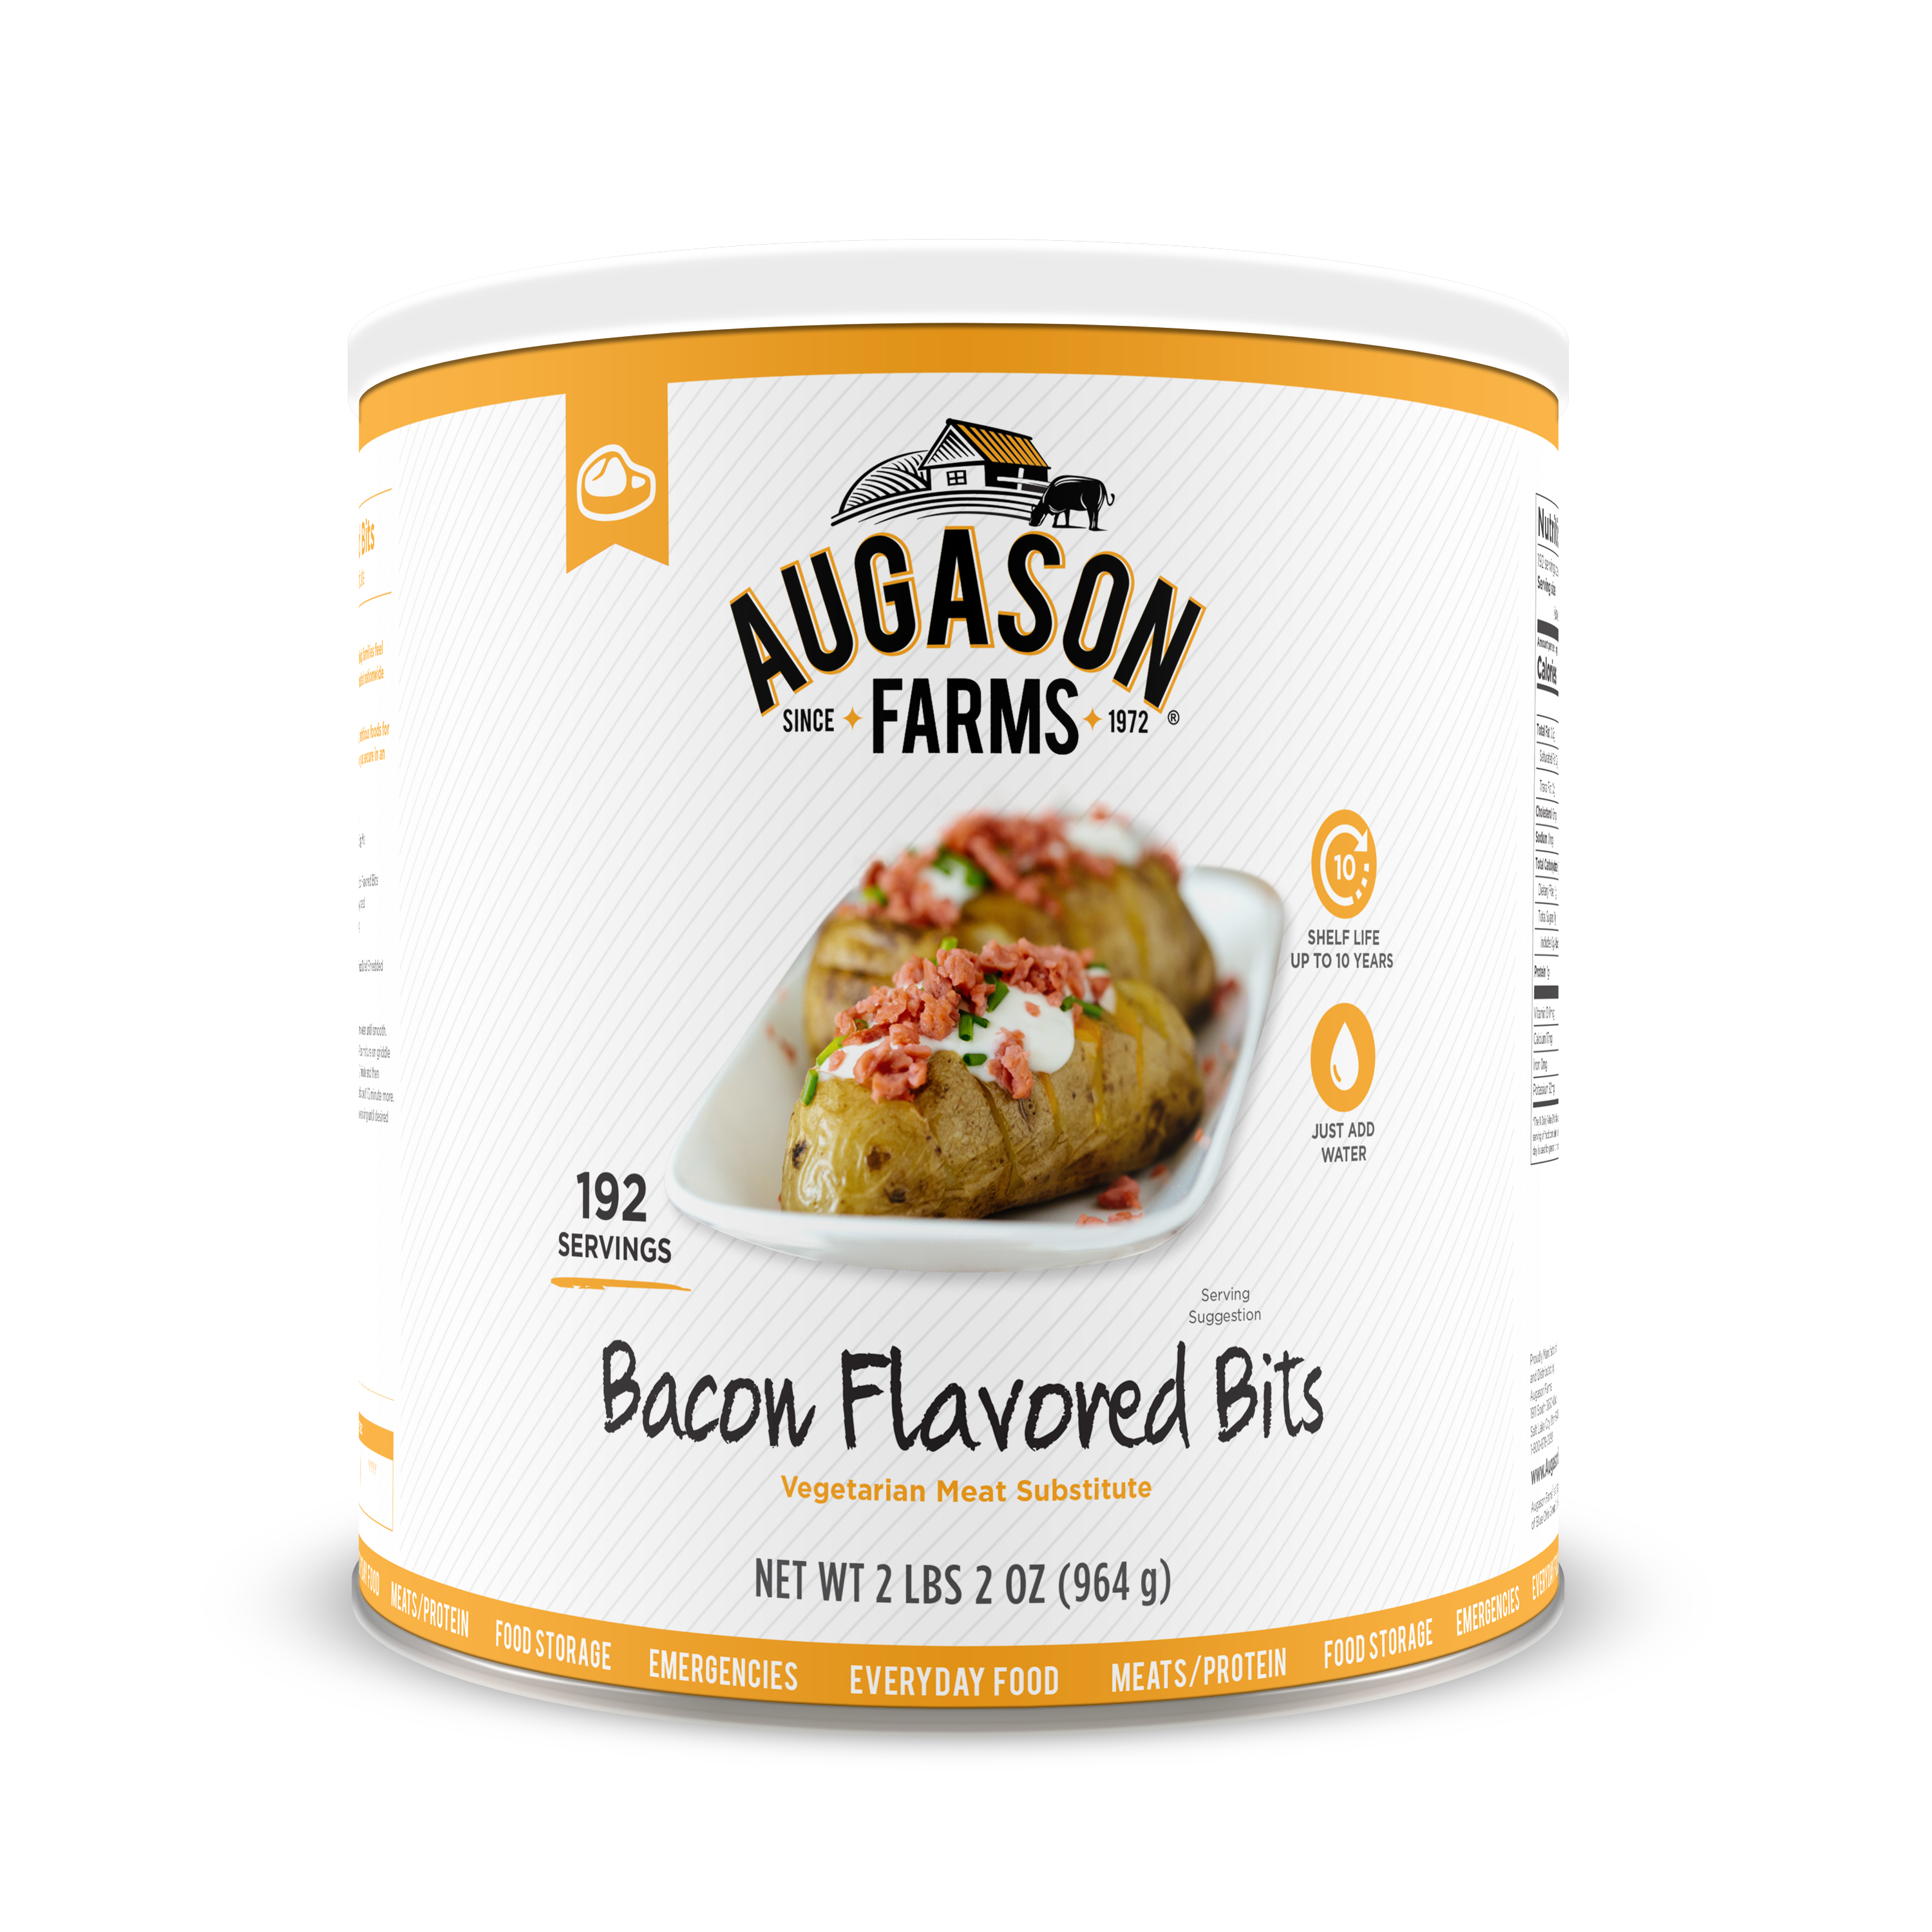 Augason Farms Bacon Flavored Bits Vegetarian Meat Substitute 2 lbs 2 oz No. 10 Can - image 1 of 9